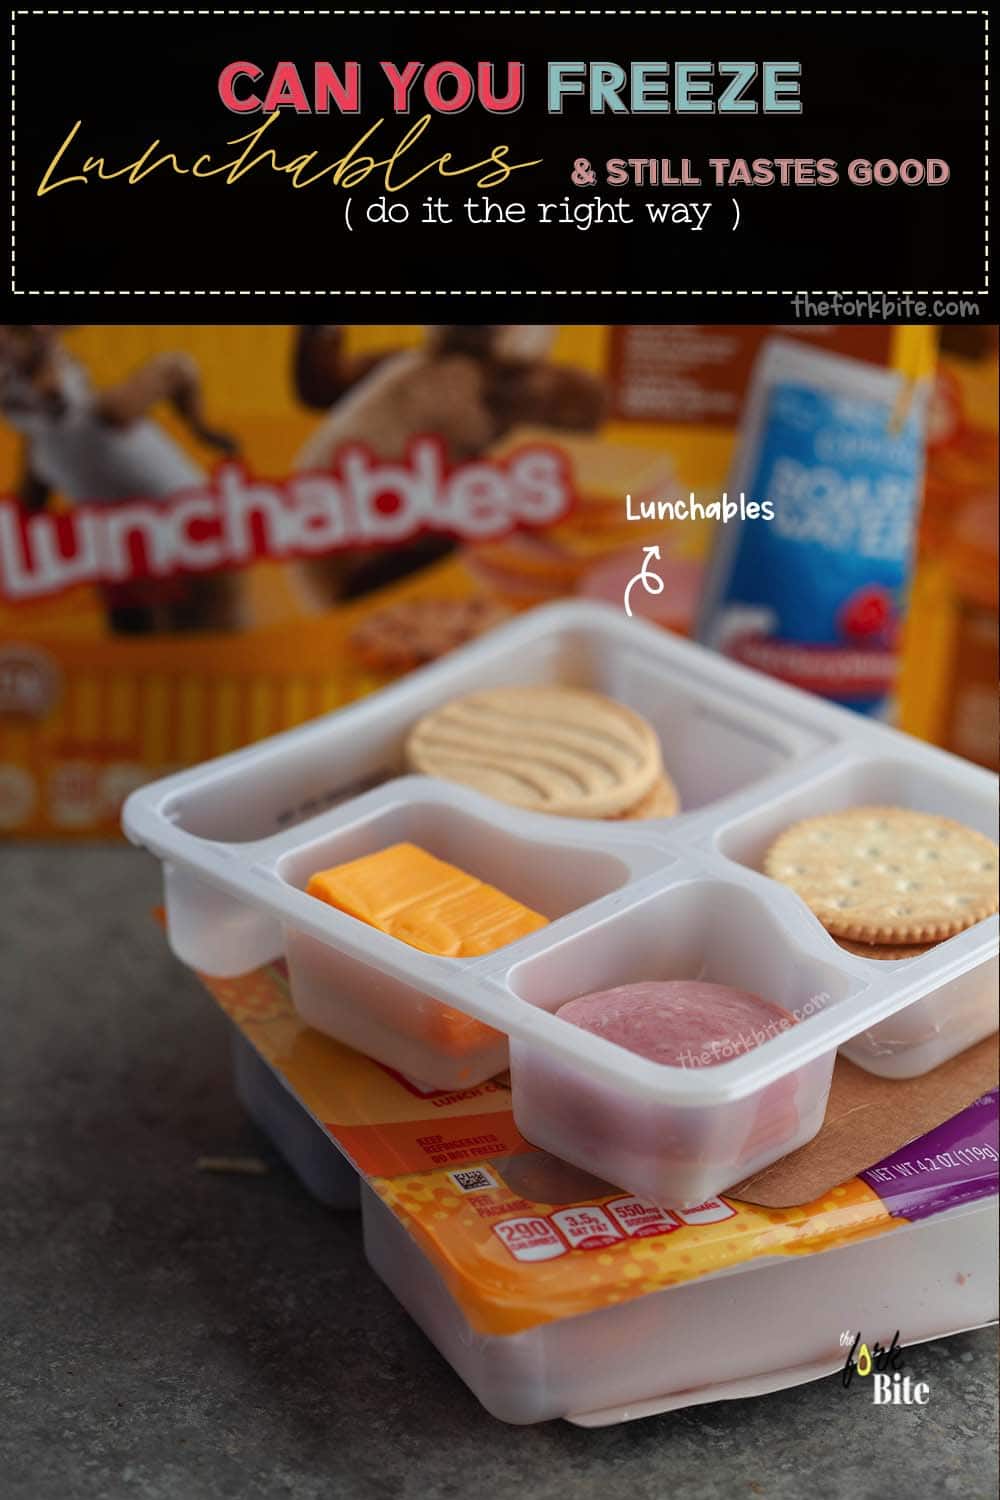 When asking questions about food safety concerning freezing Lunchables, the first thing you have to consider is the fact that there are various types of these snacks.